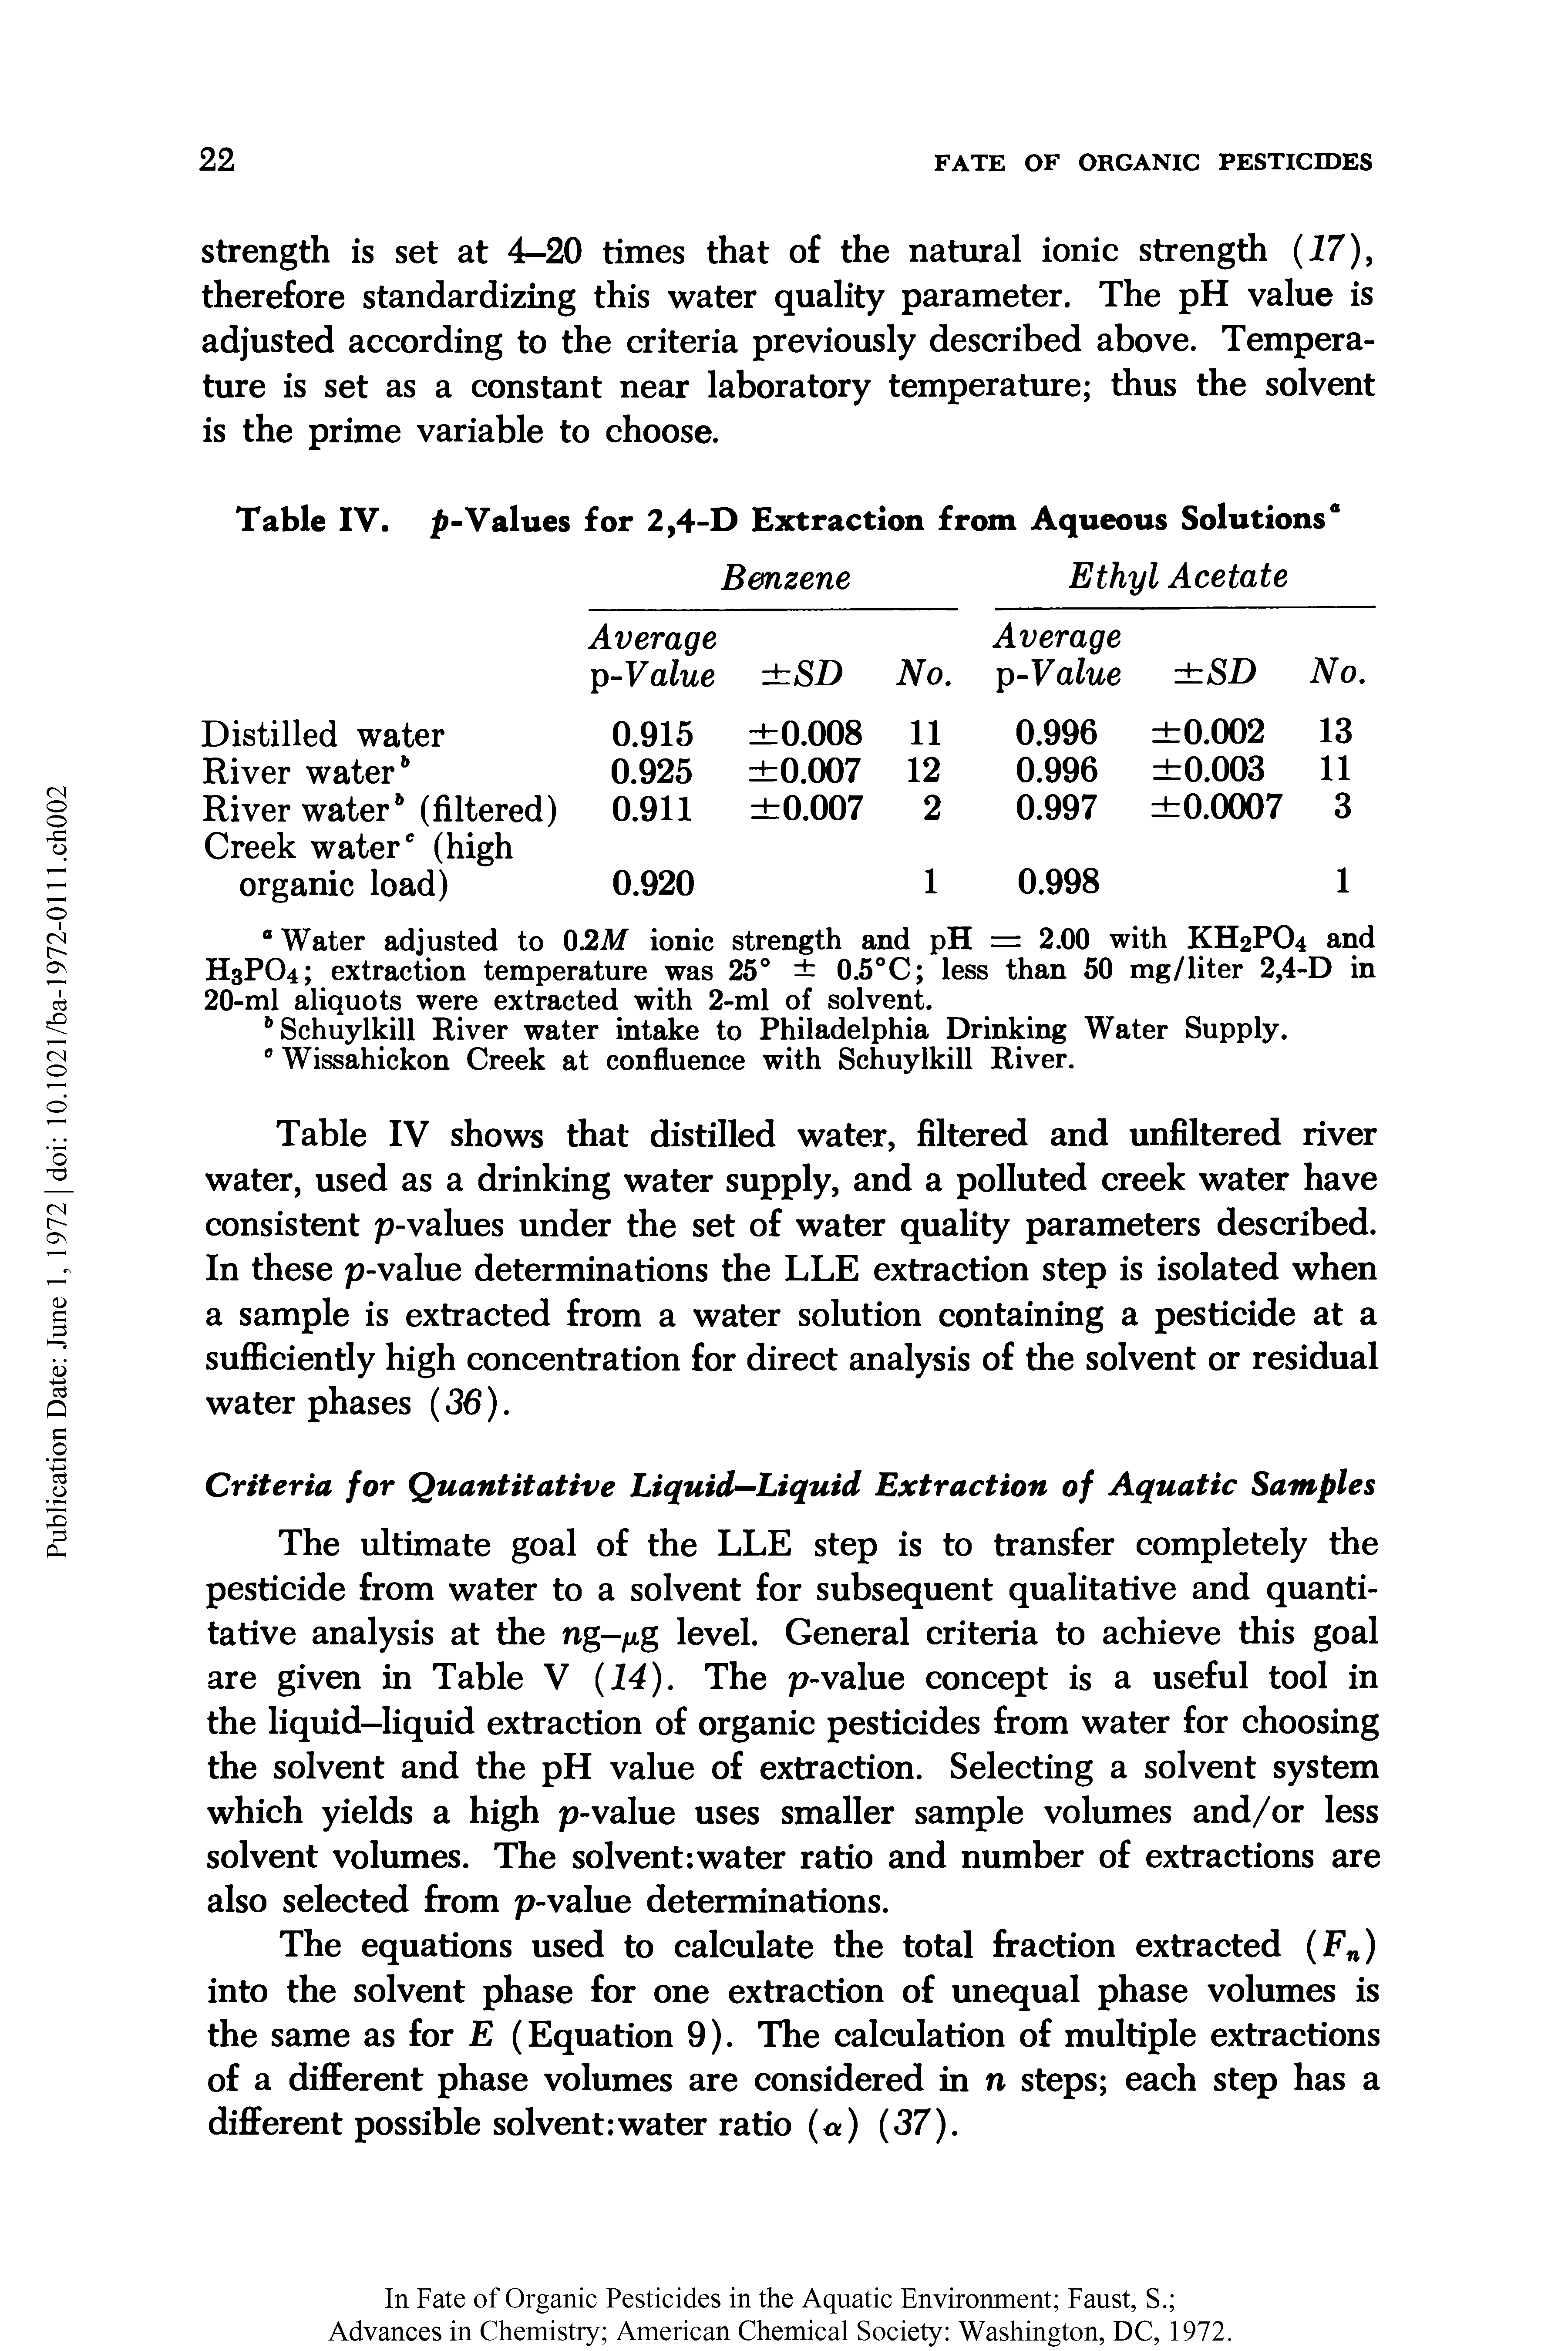 Table IV shows that distilled water, filtered and unfiltered river water, used as a drinking water supply, and a polluted creek water have consistent p-values under the set of water quality parameters described. In these p-value determinations the LLE extraction step is isolated when a sample is extracted from a water solution containing a pesticide at a suflBciently high concentration for direct analysis of the solvent or residual water phases (36).